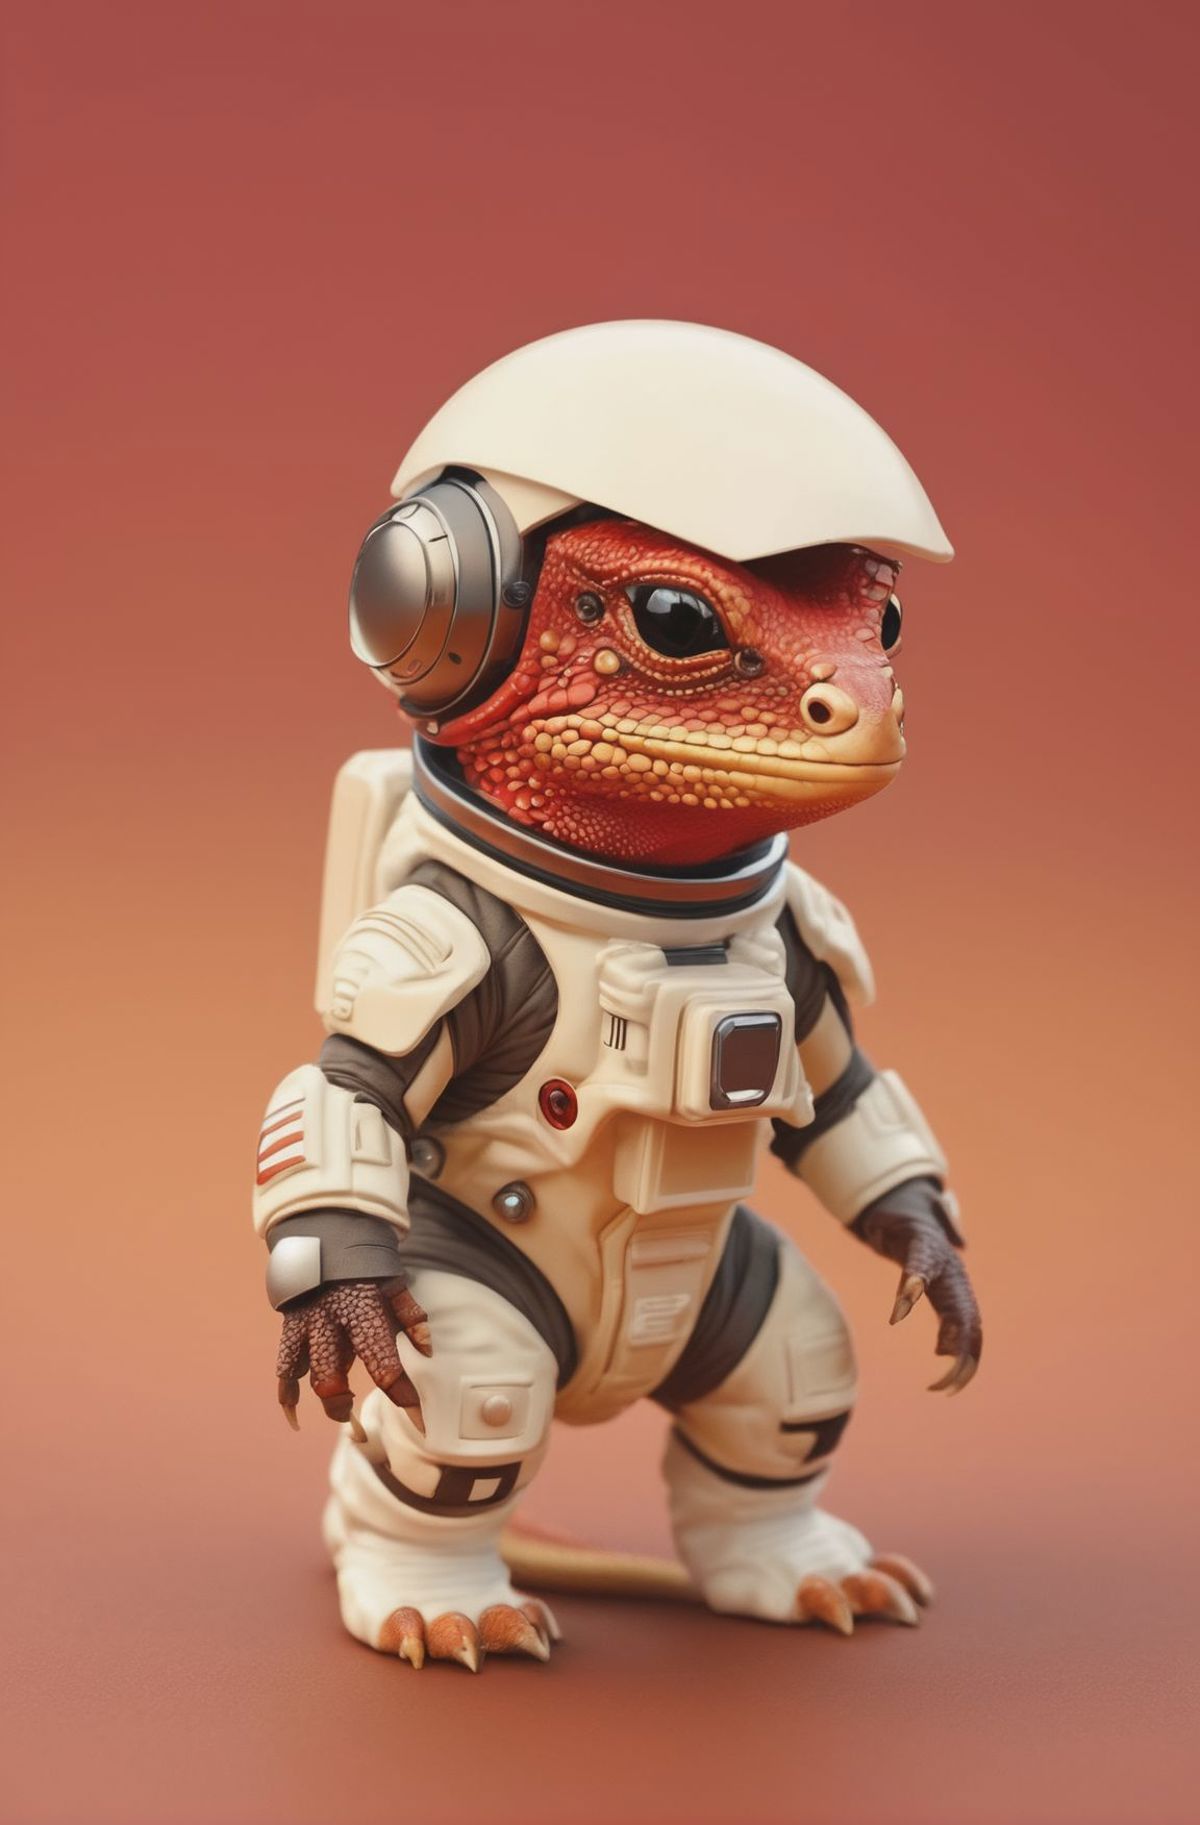 A red lizard figurine wearing a white space suit and headphones.